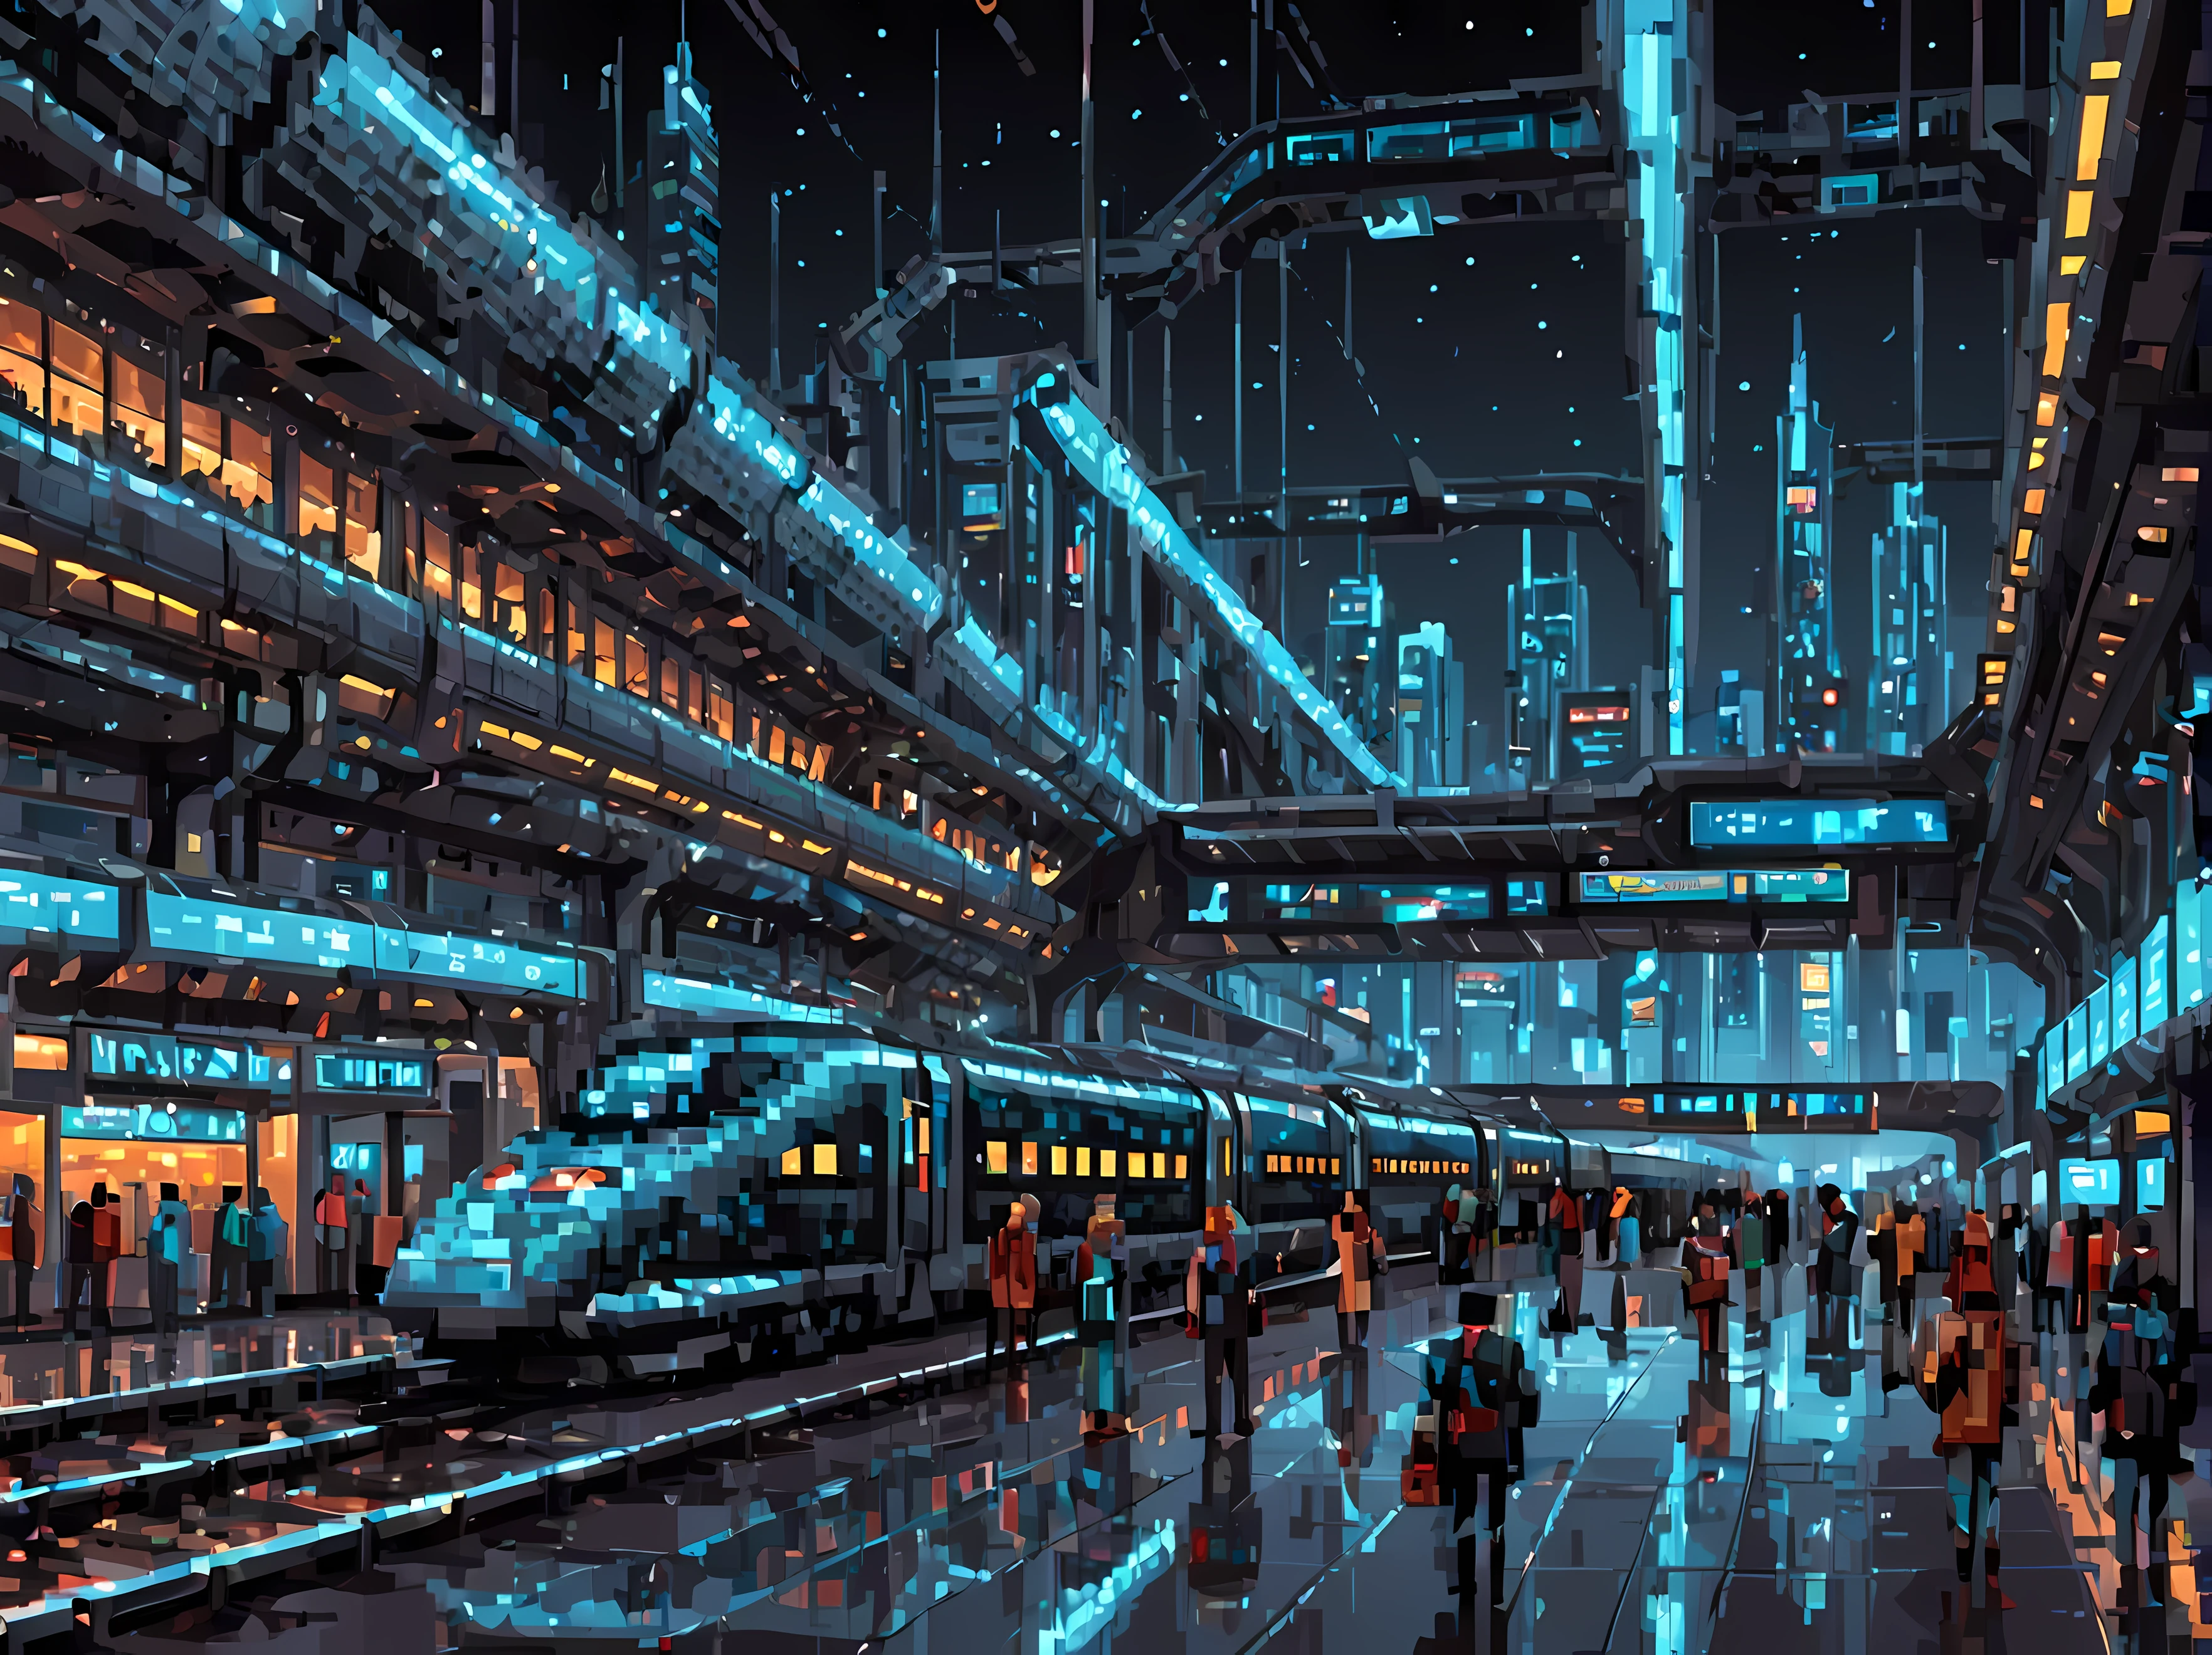 Pixel art, a captivating scene featuring a futuristic train station at the glow of the otherworldly planet at night, sleek modern, architecture with transparent glass panels, a high-speed train, advanced technological elements like holographic displays and robotic assistants, a futuristic cityscape backdrop, cyberpunk passengers, masterpiece in maximum 16K resolution, superb quality. | ((More_Detail))